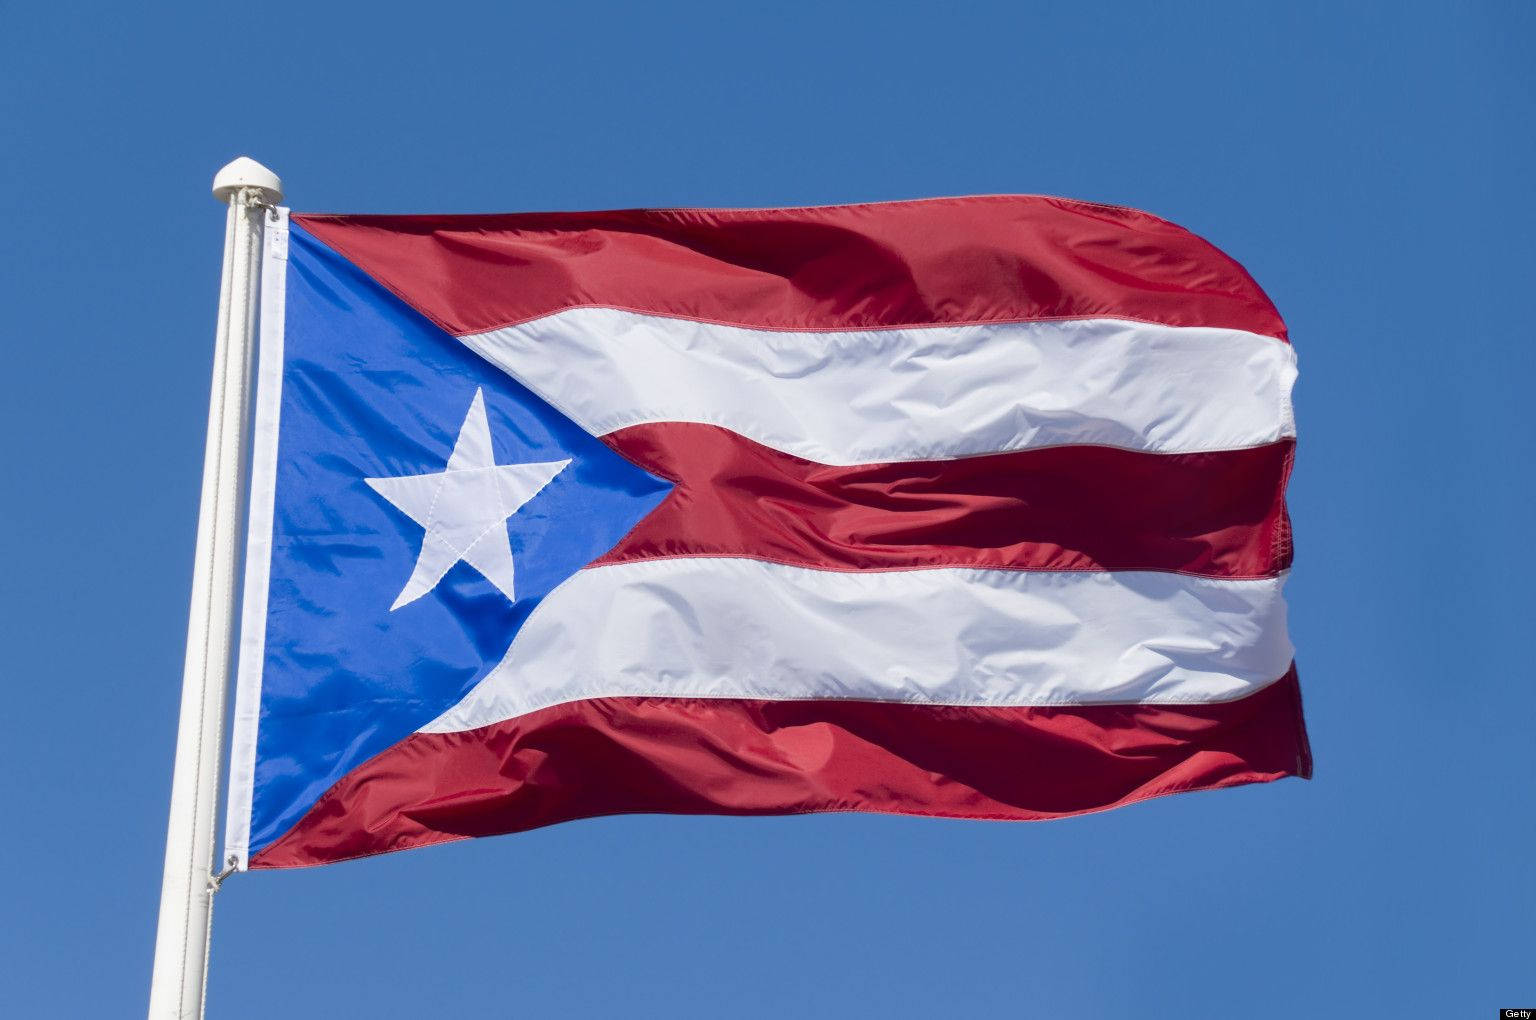 Puerto Rican Flag Up On Pole